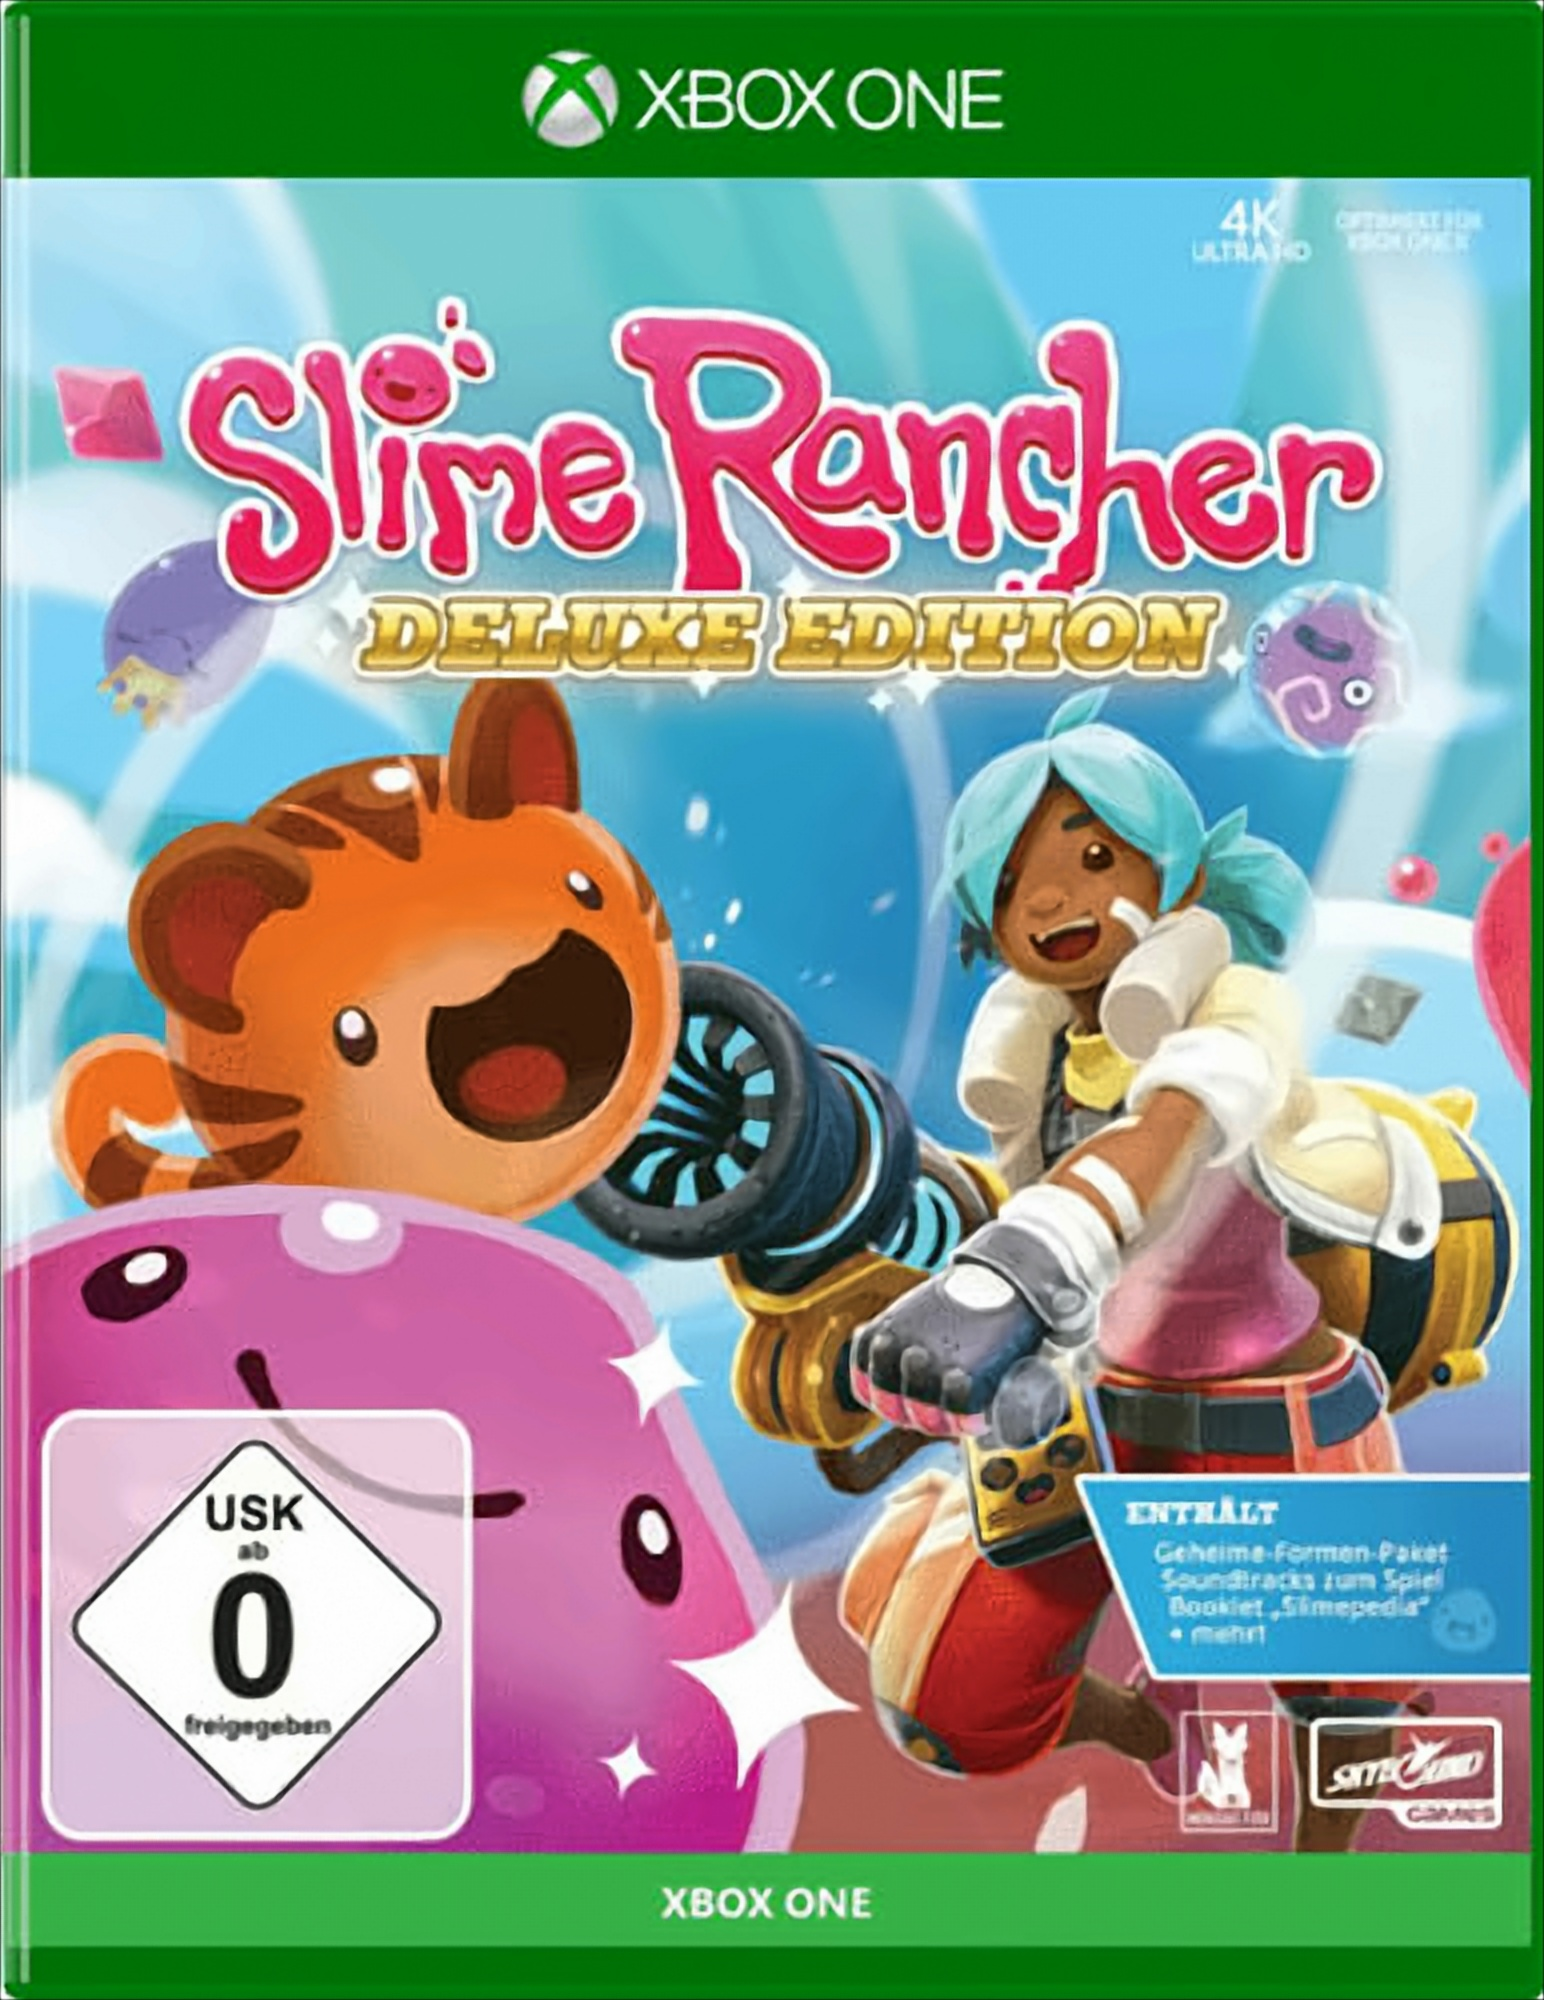 [Xbox Deluxe - One] XB-One Slime Edition Rancher